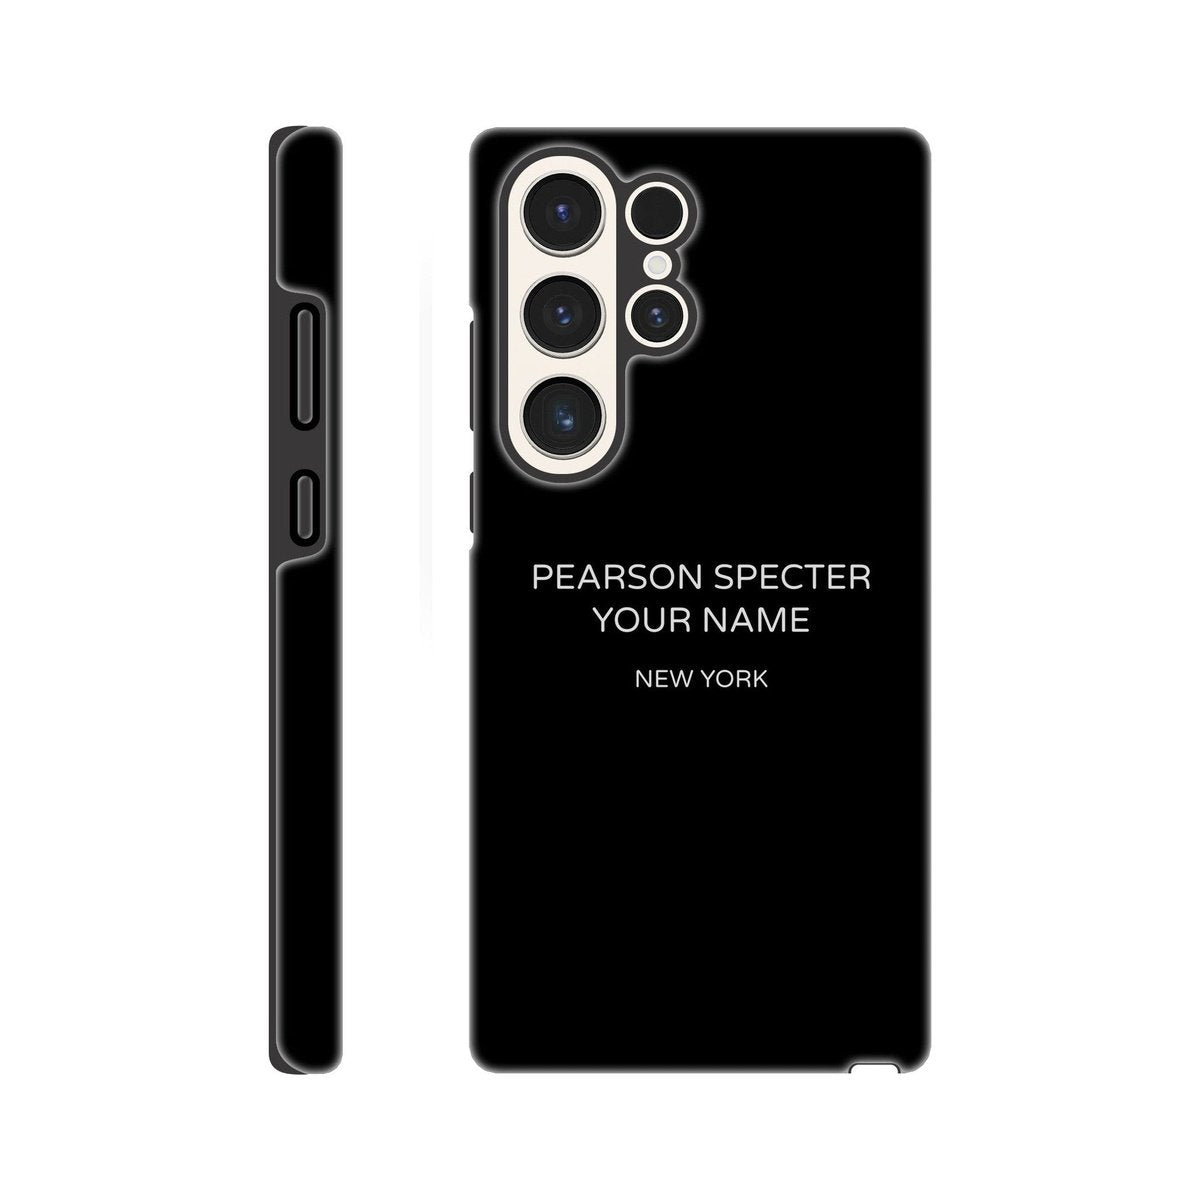 Suits TV Show Pearson Specter Your Name - Samsung Phone Case